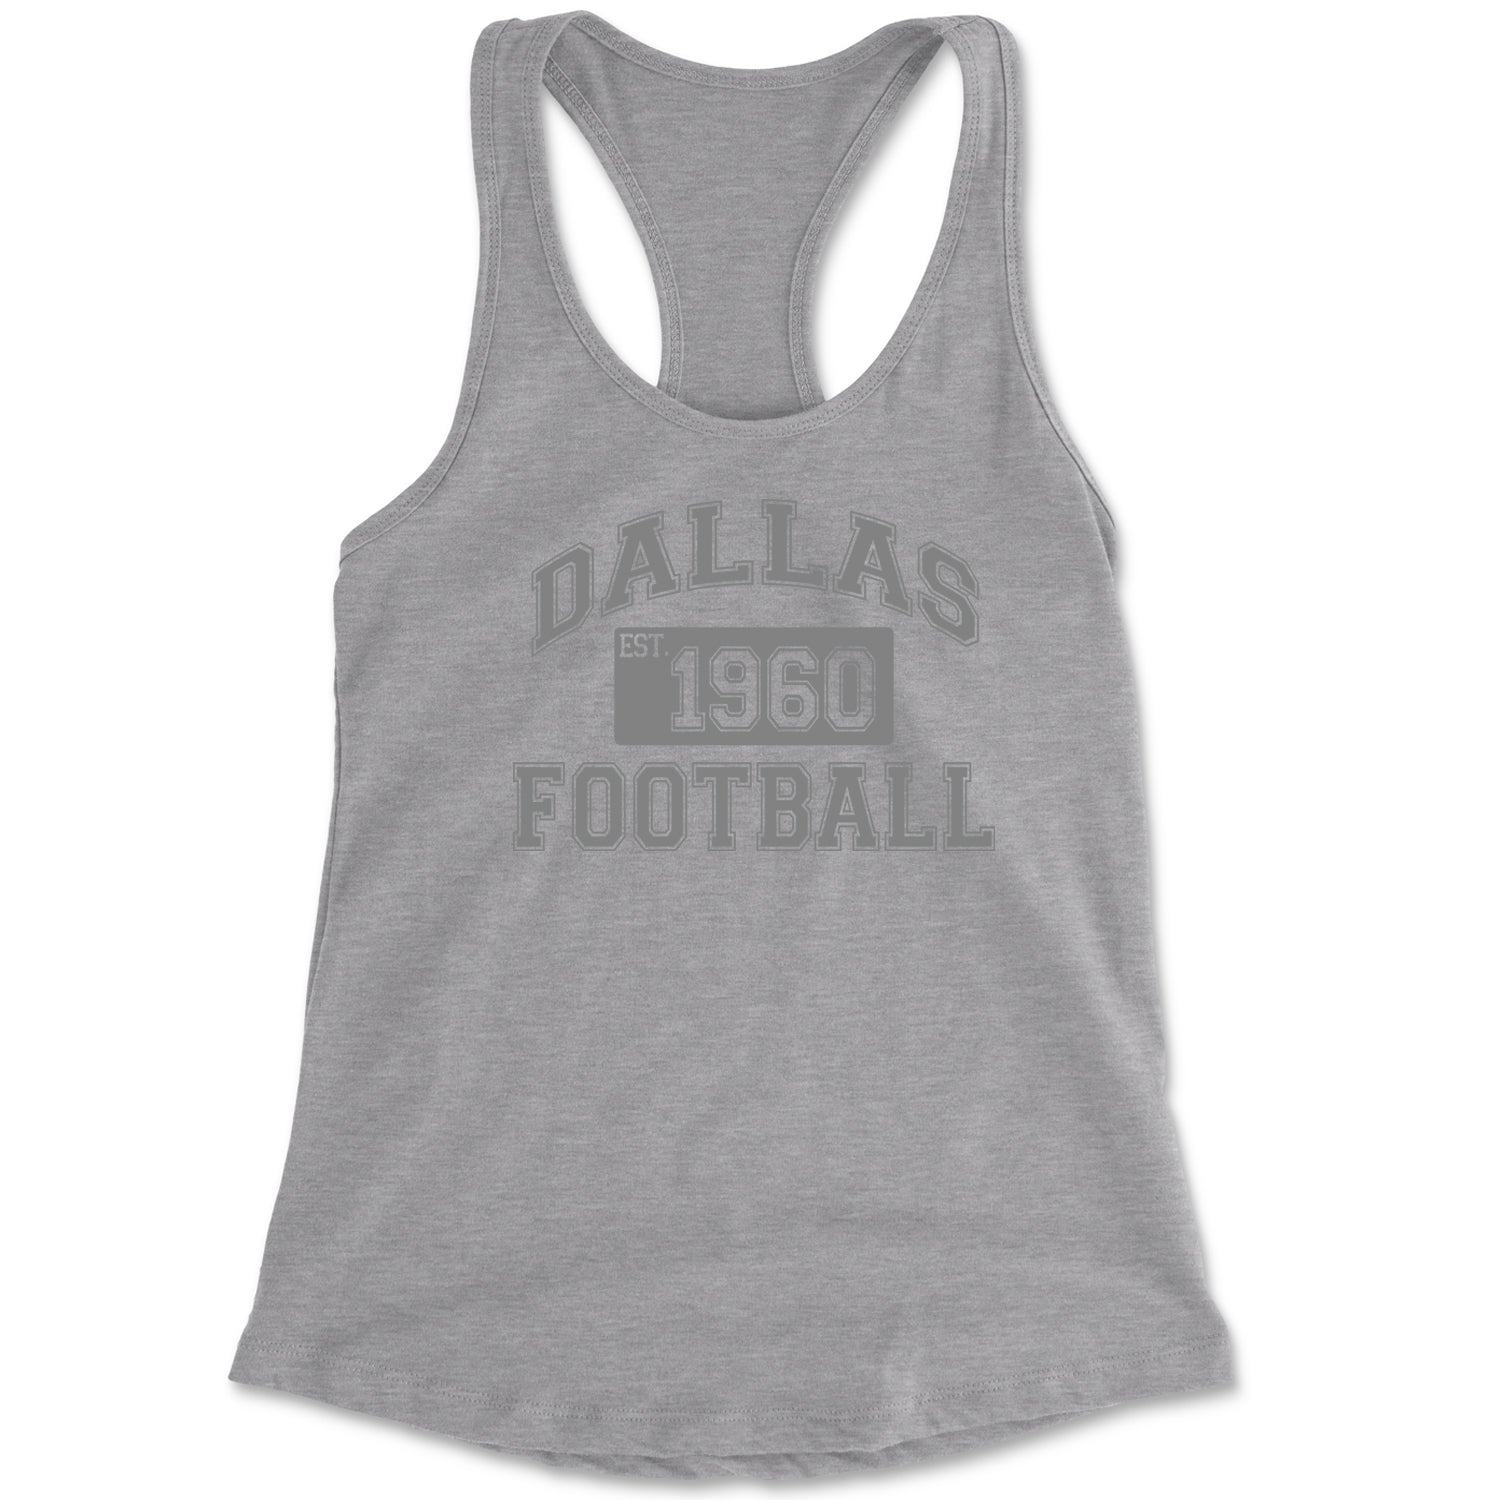 Dallas Football Established 1960 Racerback Tank Top for Women boys, dem by Expression Tees